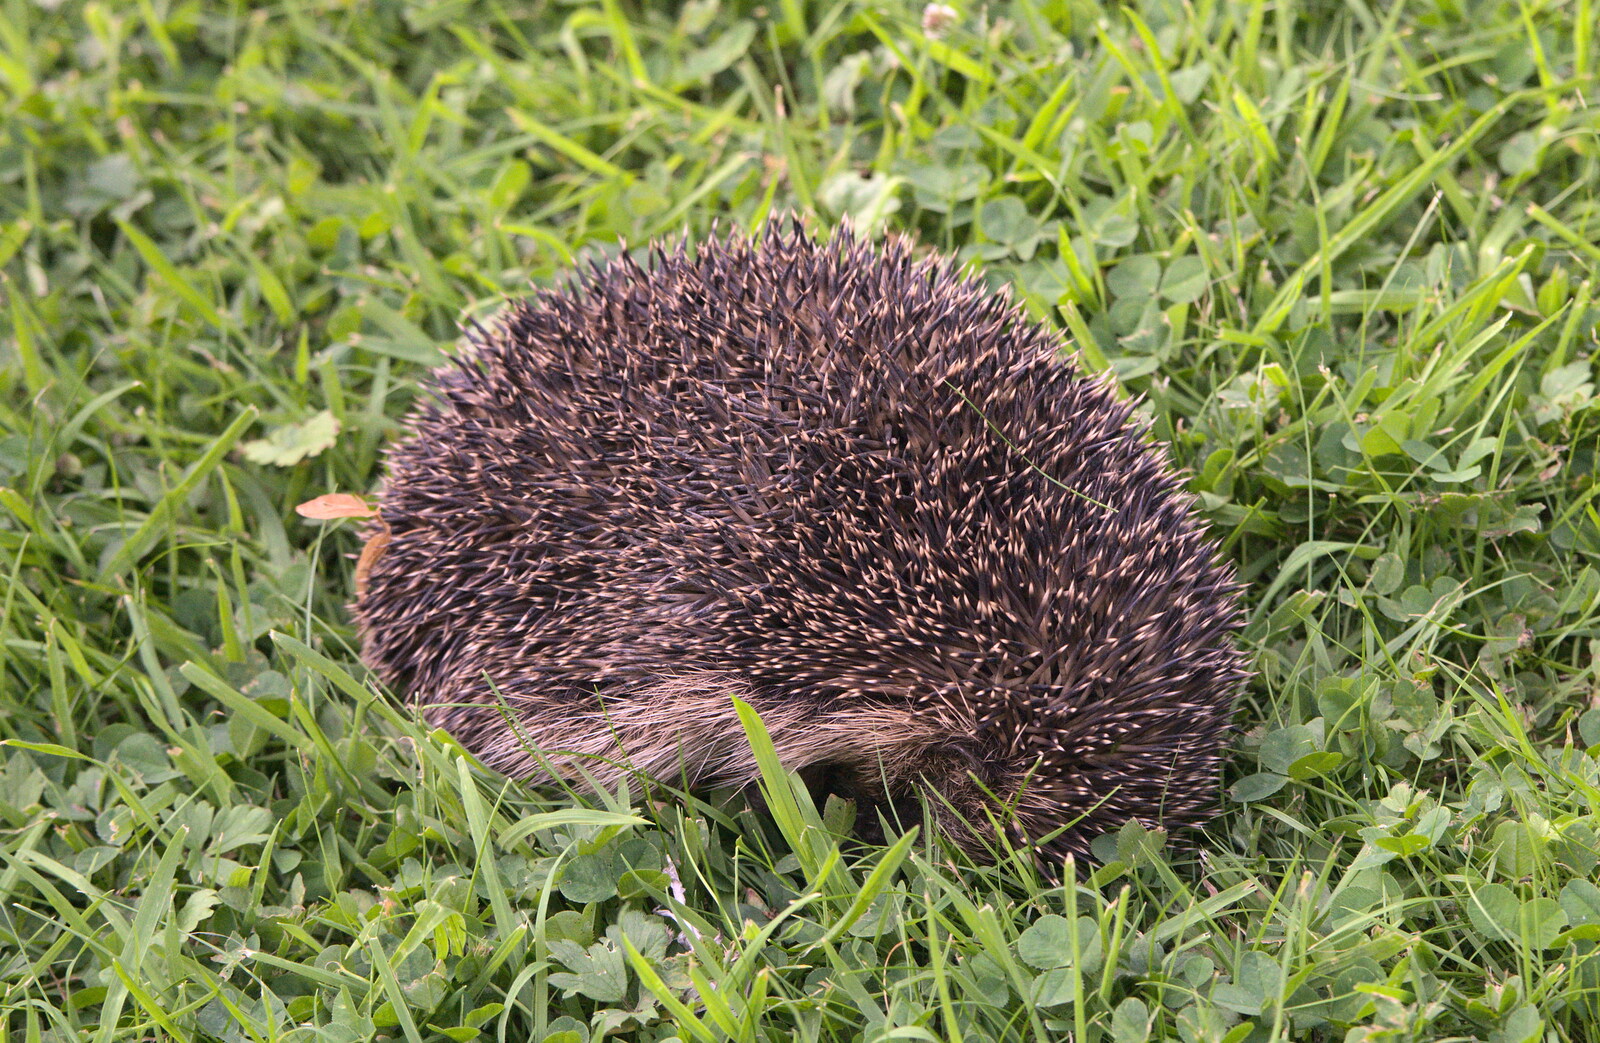 Hedgey the Hedgehog appears in the garden from Bob and Bernice's 50th Wedding Anniversary, Hinton Admiral, Dorset - 25th July 2014